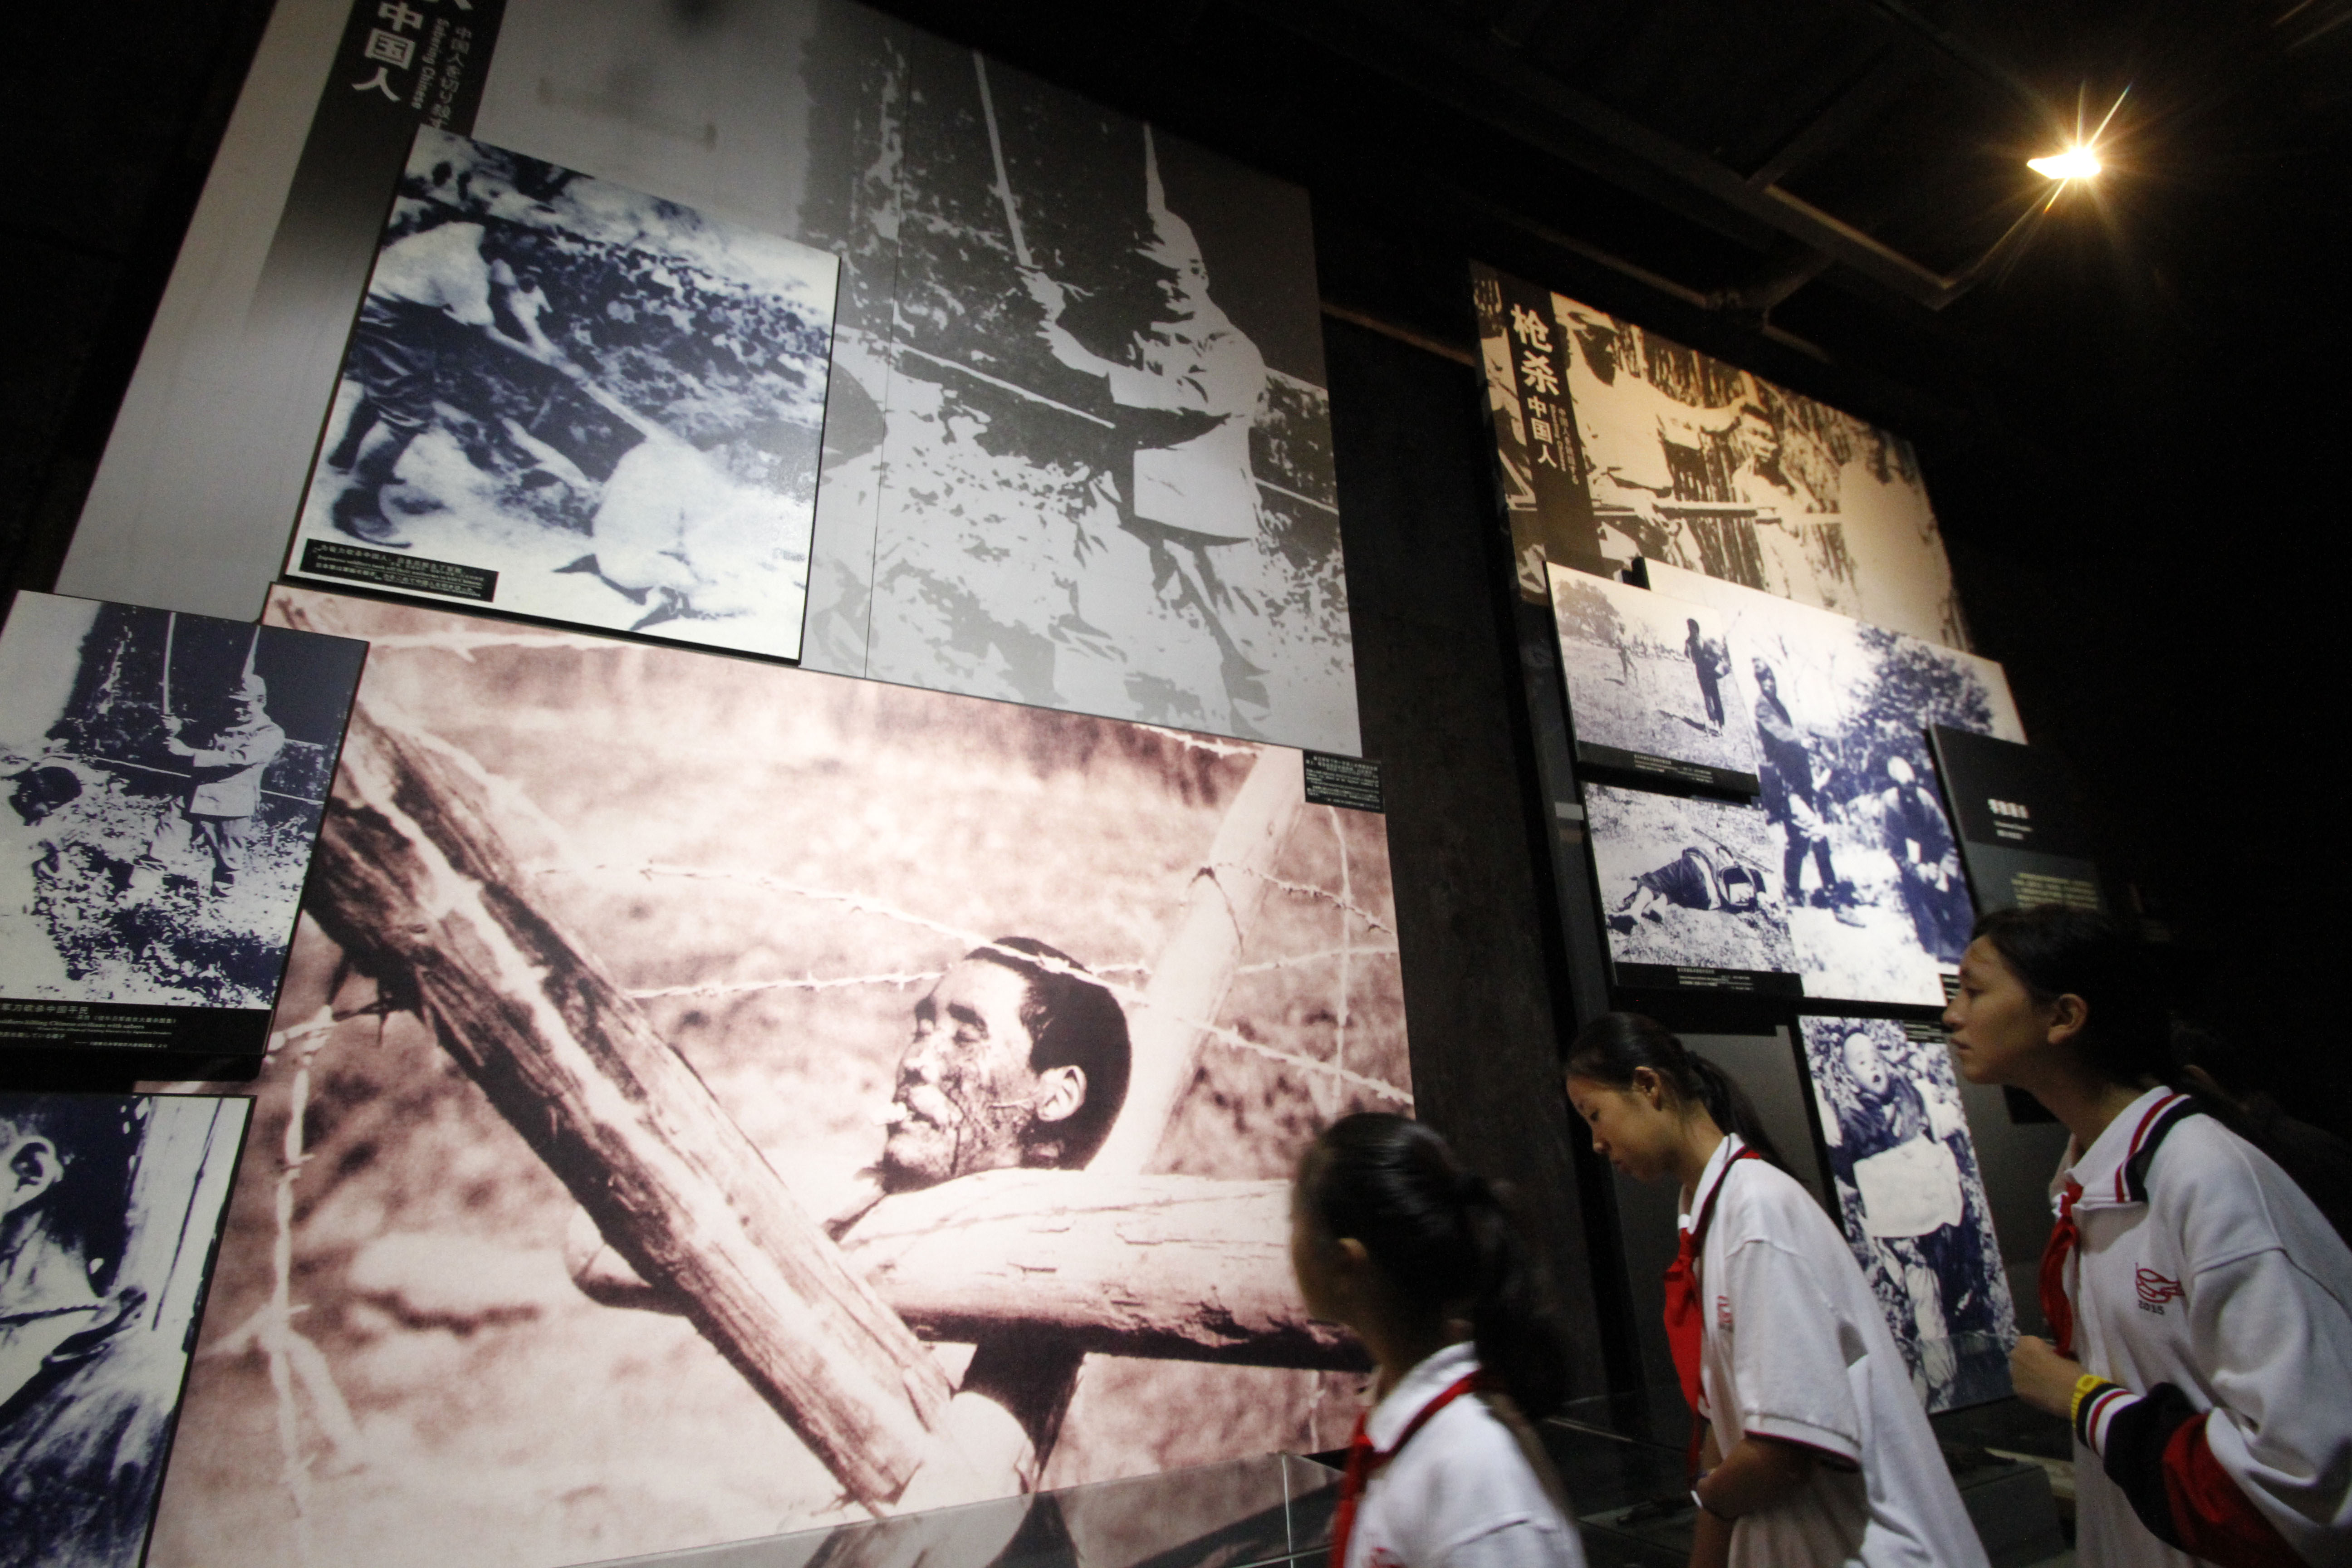 Visiting schoolchildren look at photos on display at the Nanjing Massacre Memorial Hall in Nanjing on October 10, 2015.  Japan on October 10 lashed out at UNESCO's decision to inscribe documents related to the Nanjing massacre in its Memory of the World register, describing it as "extremely regrettable" and calling for the process to be reformed.     CHINA OUT      AFP PHOTO / AFP PHOTO / STR